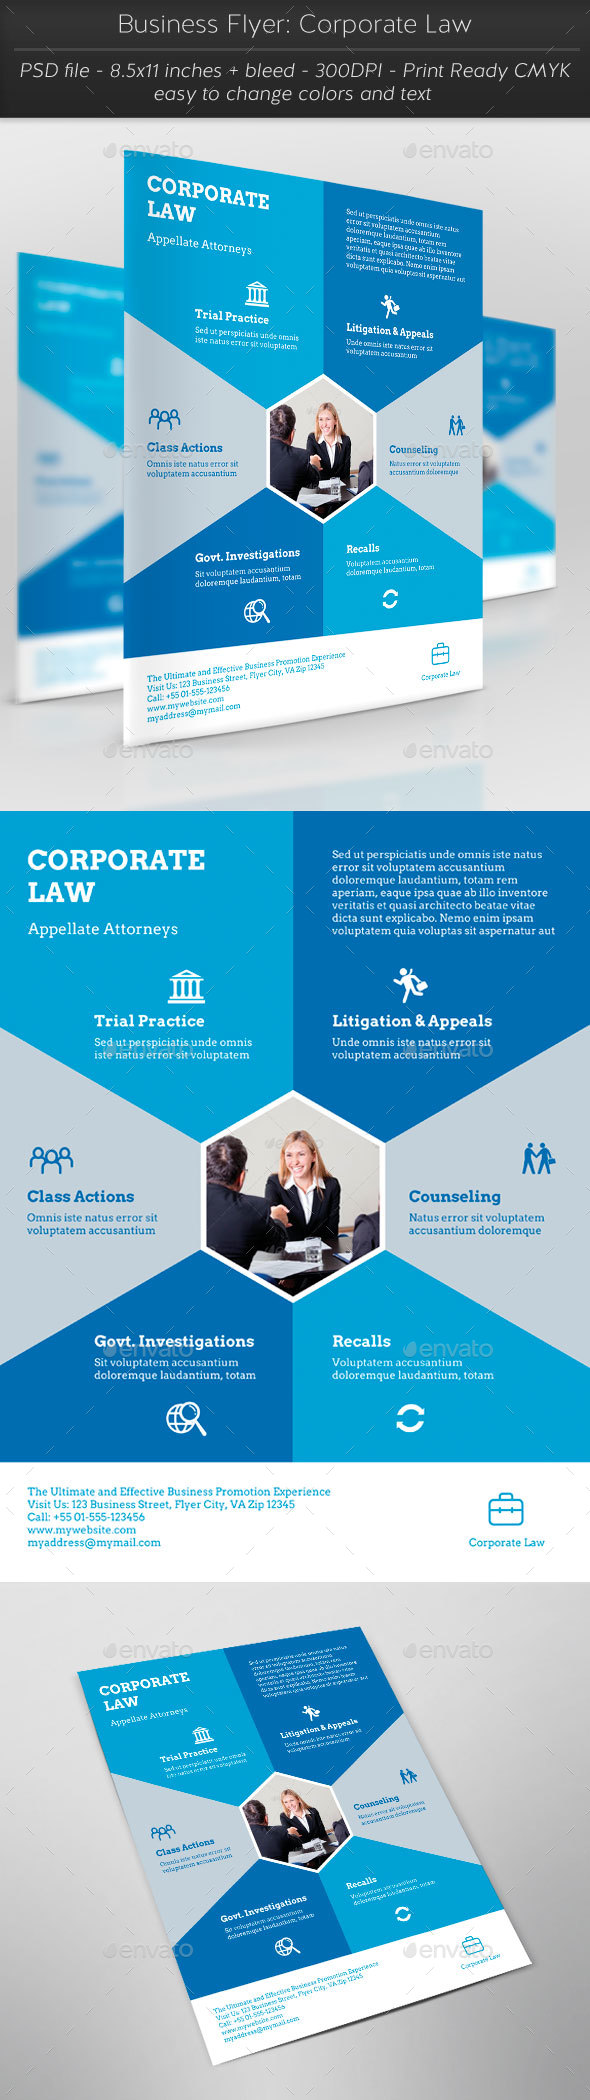 Business Flyer: Corporate Law